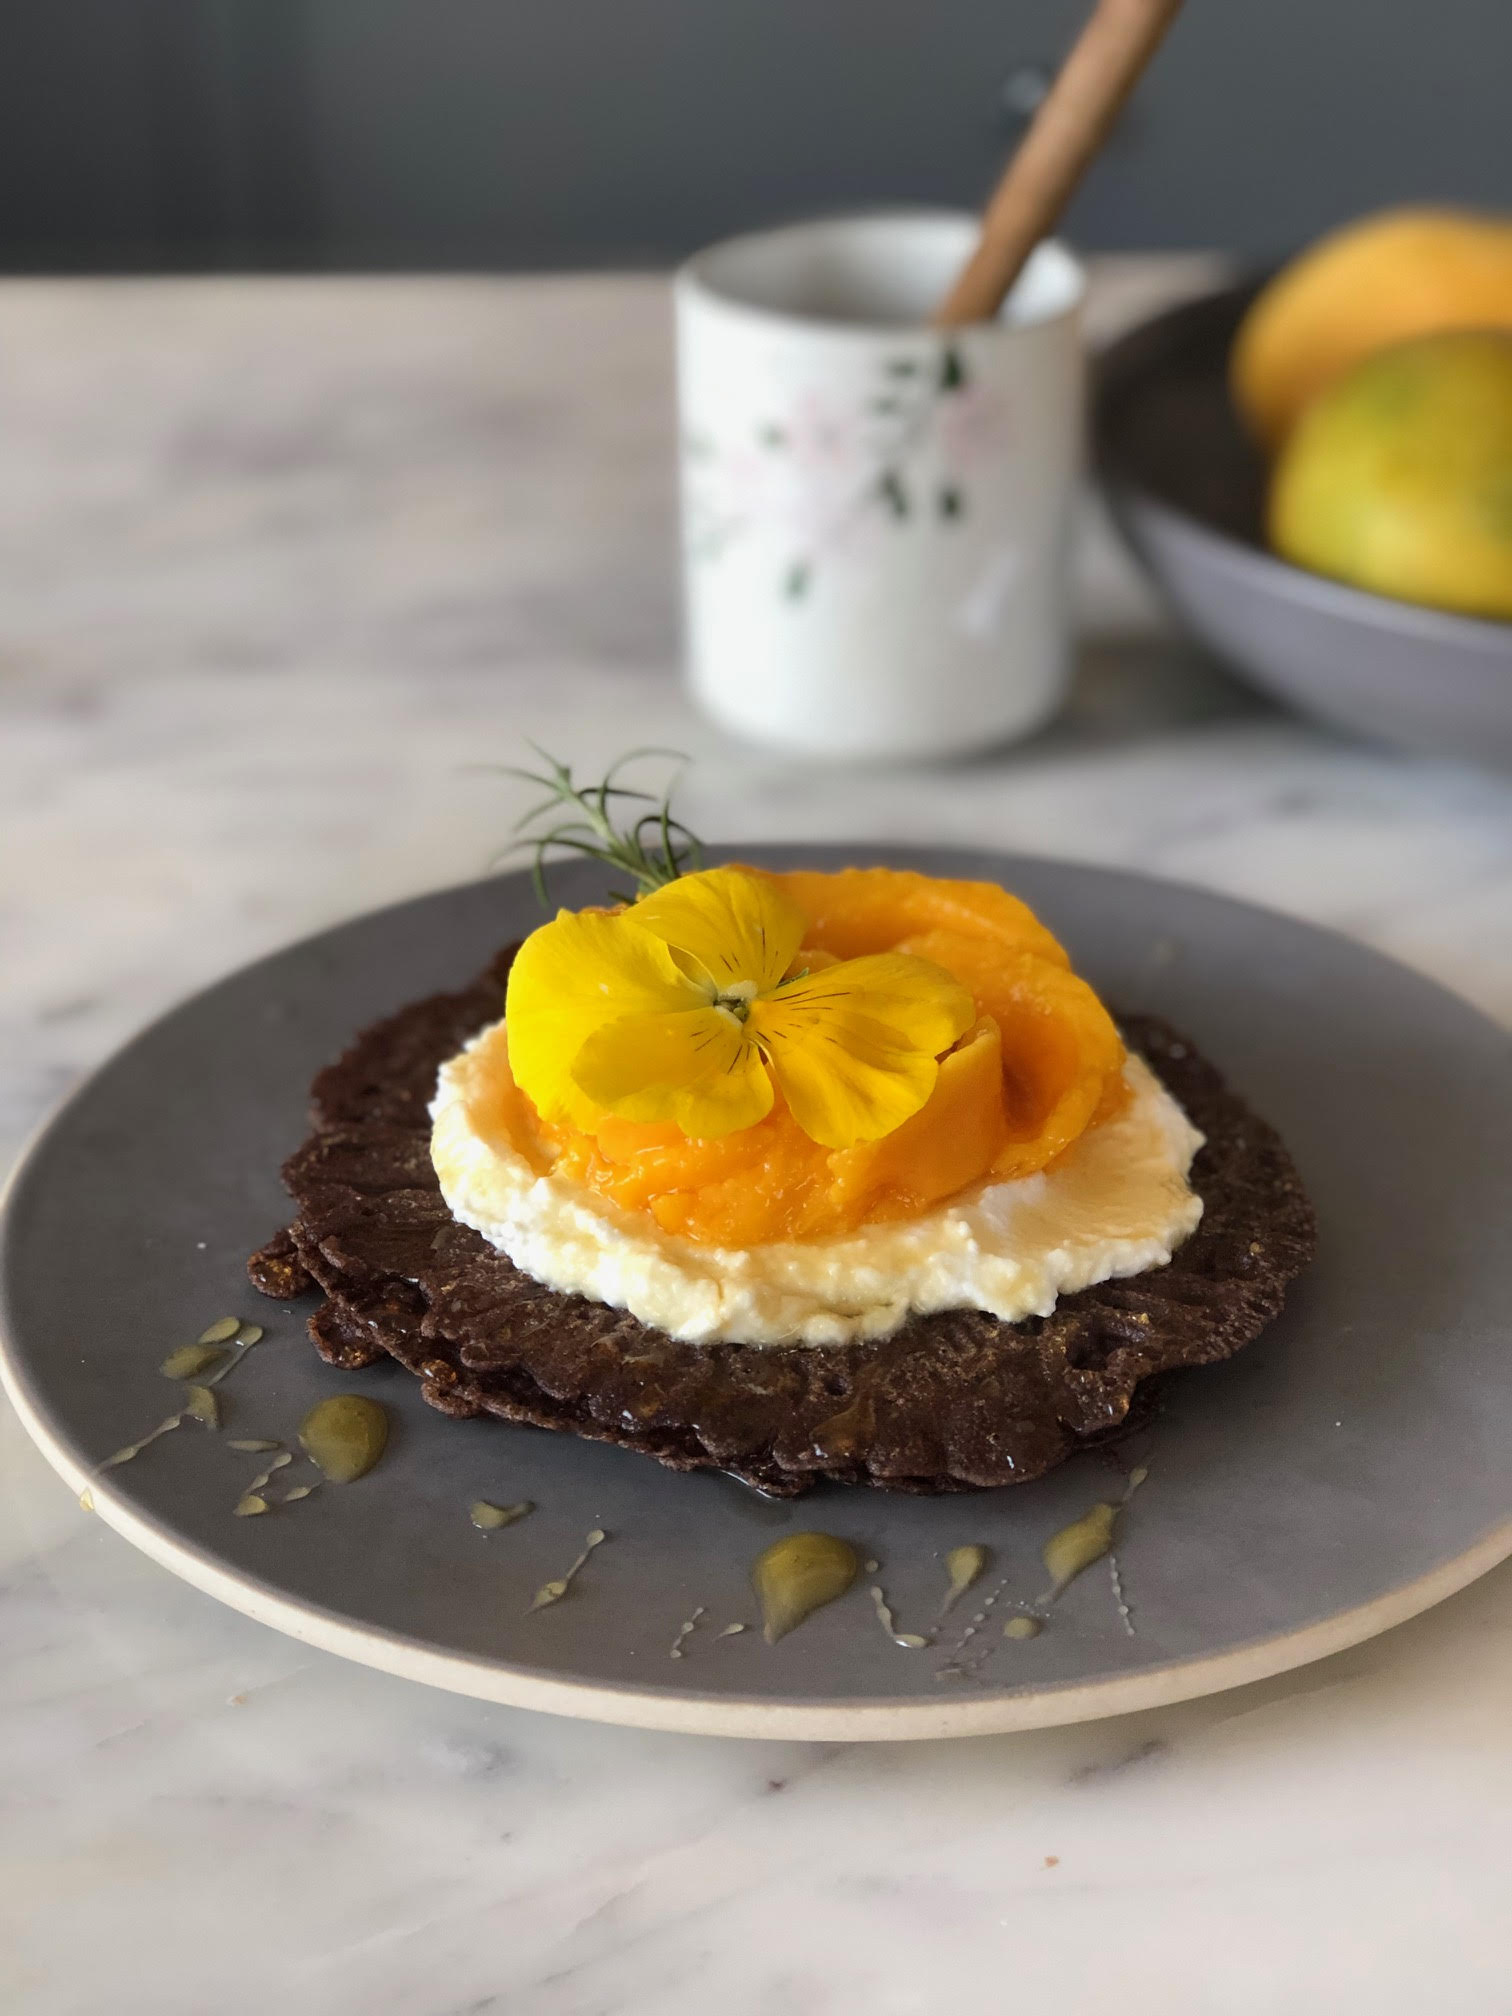 Ragi crepes with ricotta cheese